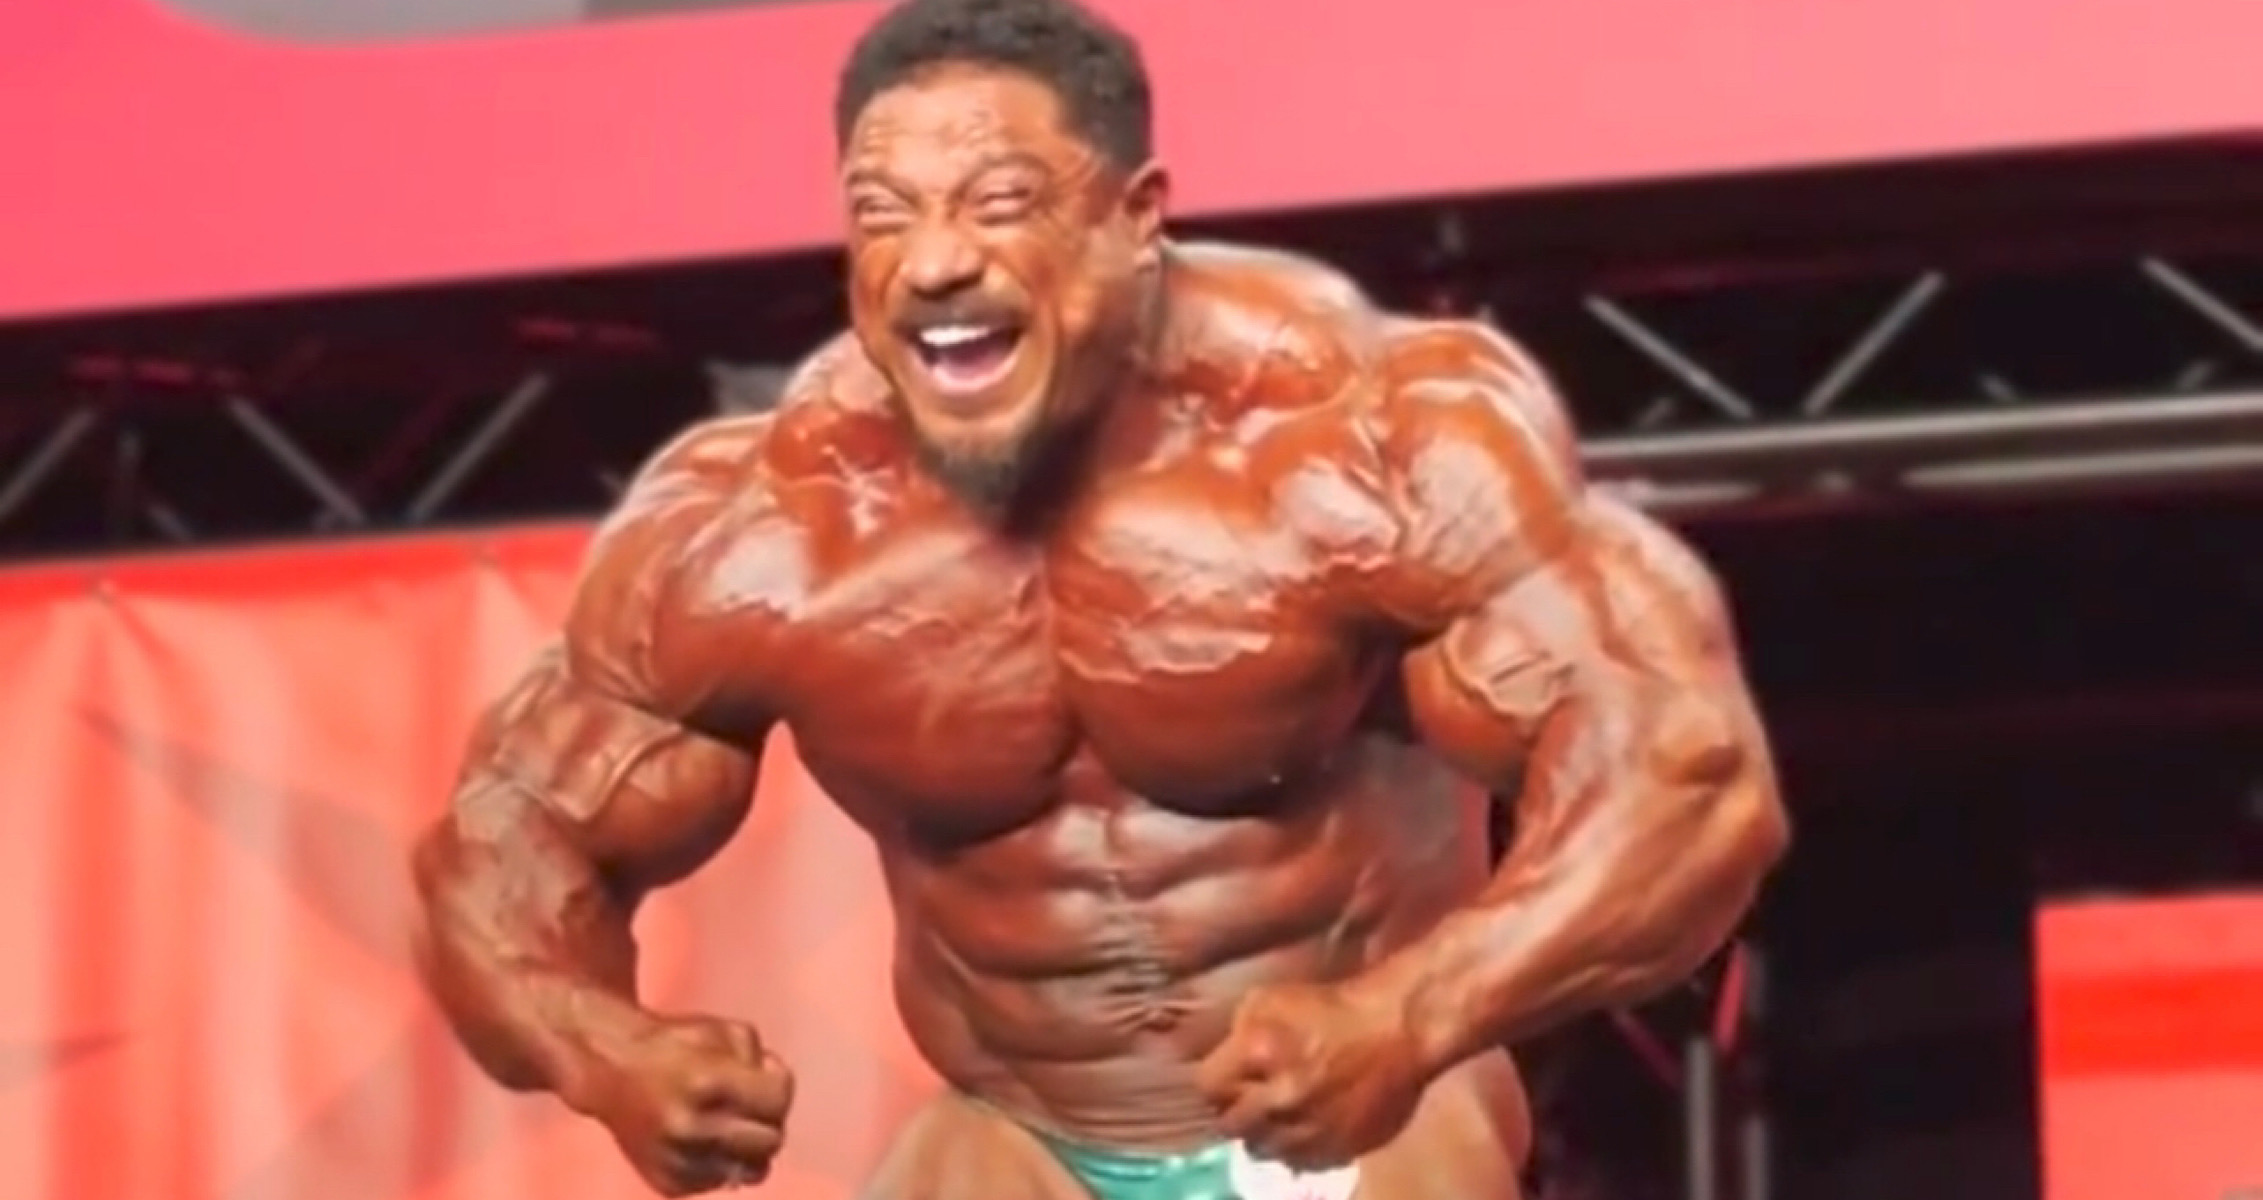 Could This Be the End of the Road for Roelly Winklaar?